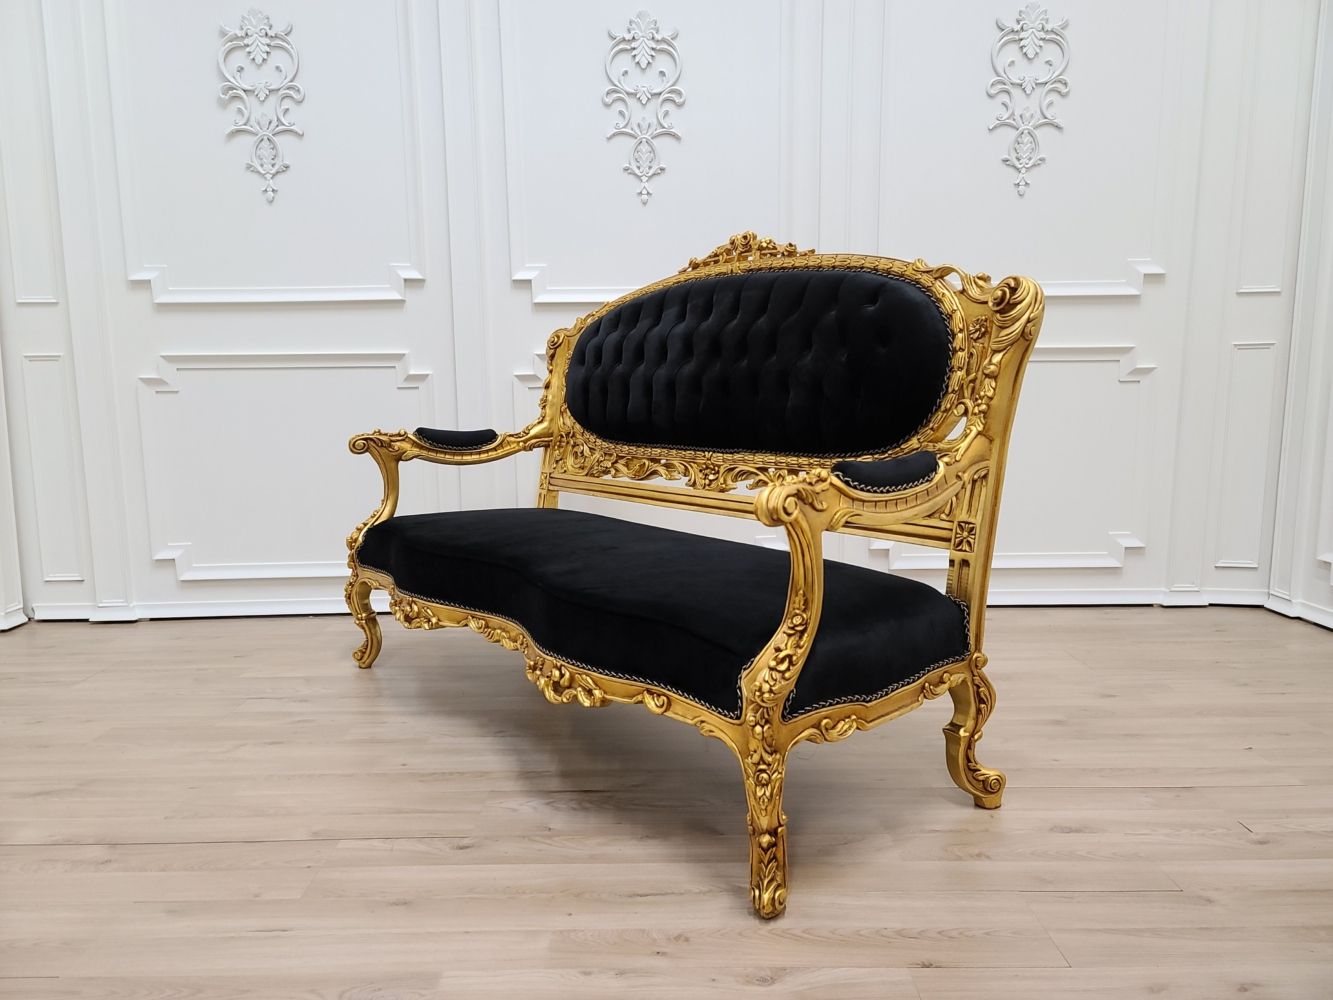 Victorian Sofa/ Antique Gold Leaf Finish Frame/ Tufted With 4pc French Seamed Sectional Sofas Velvet Black (View 10 of 15)